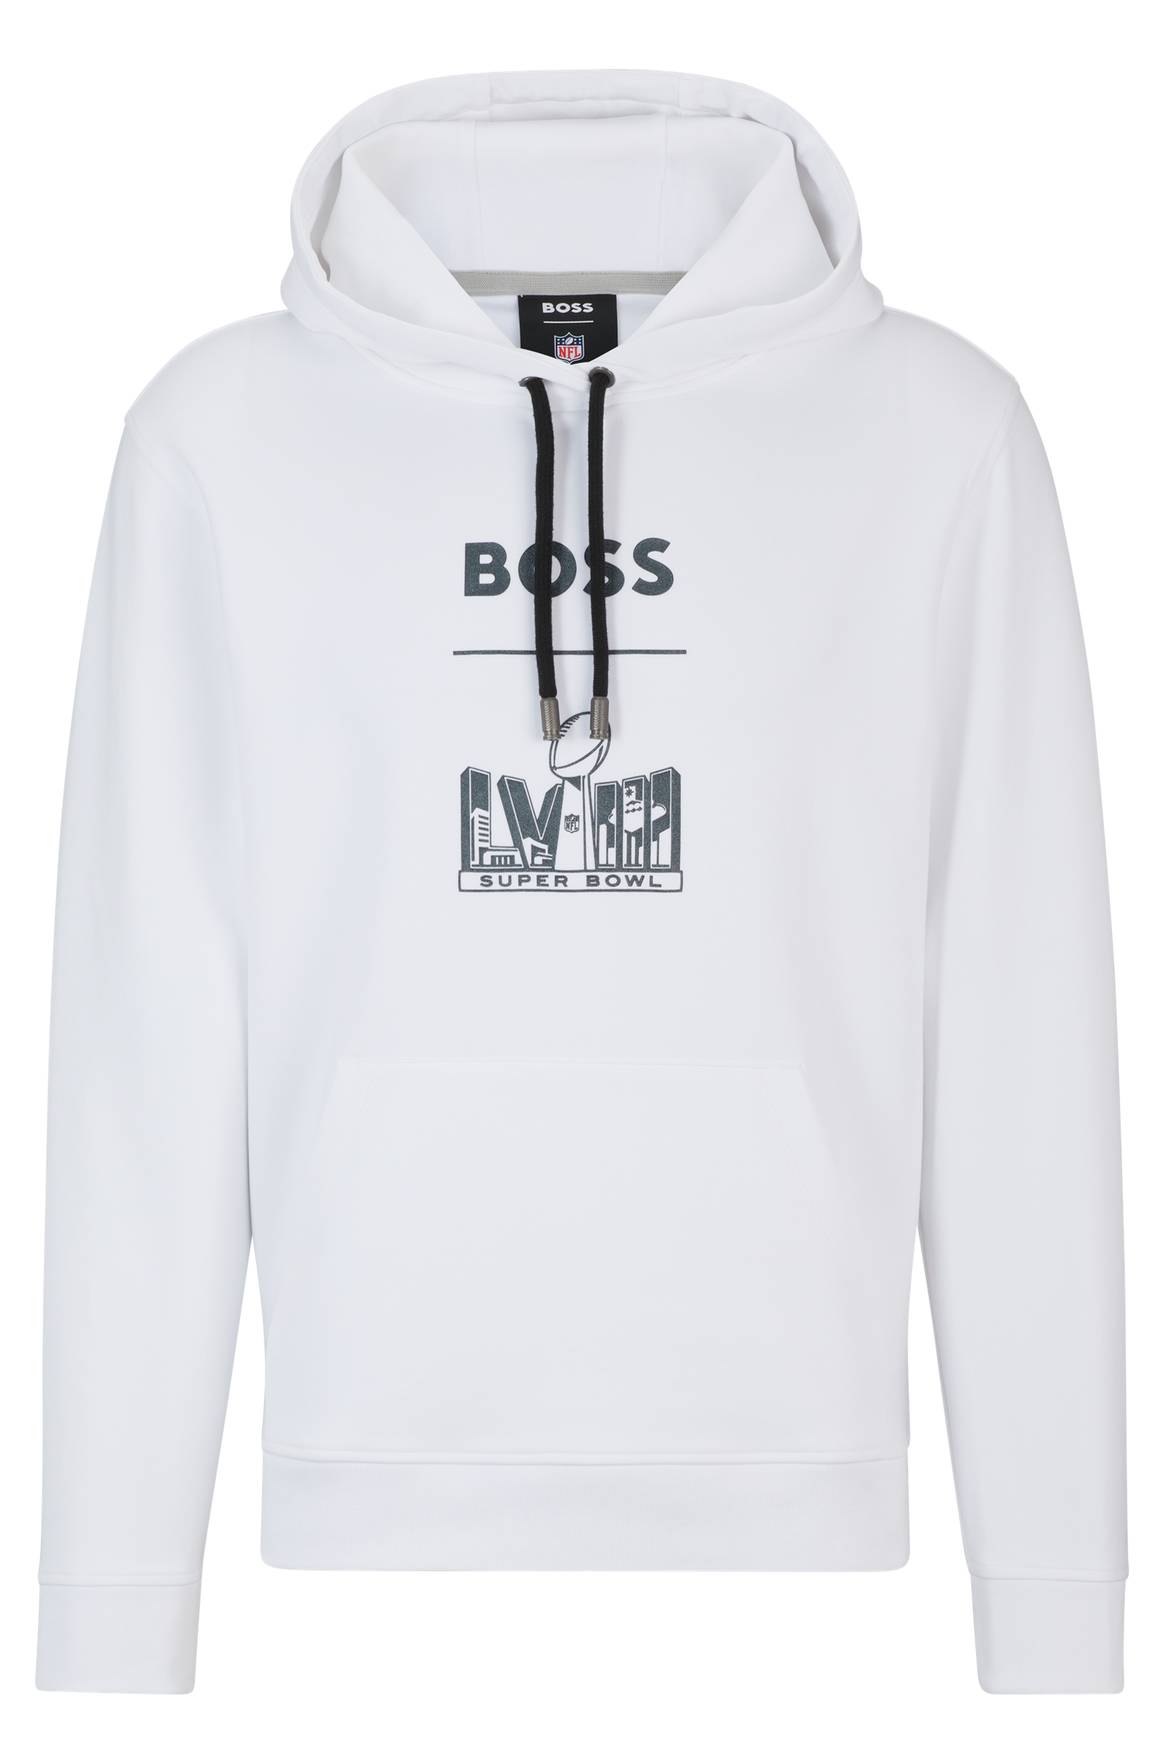 Boss x NFL Super Bowl LVIII capsule collection